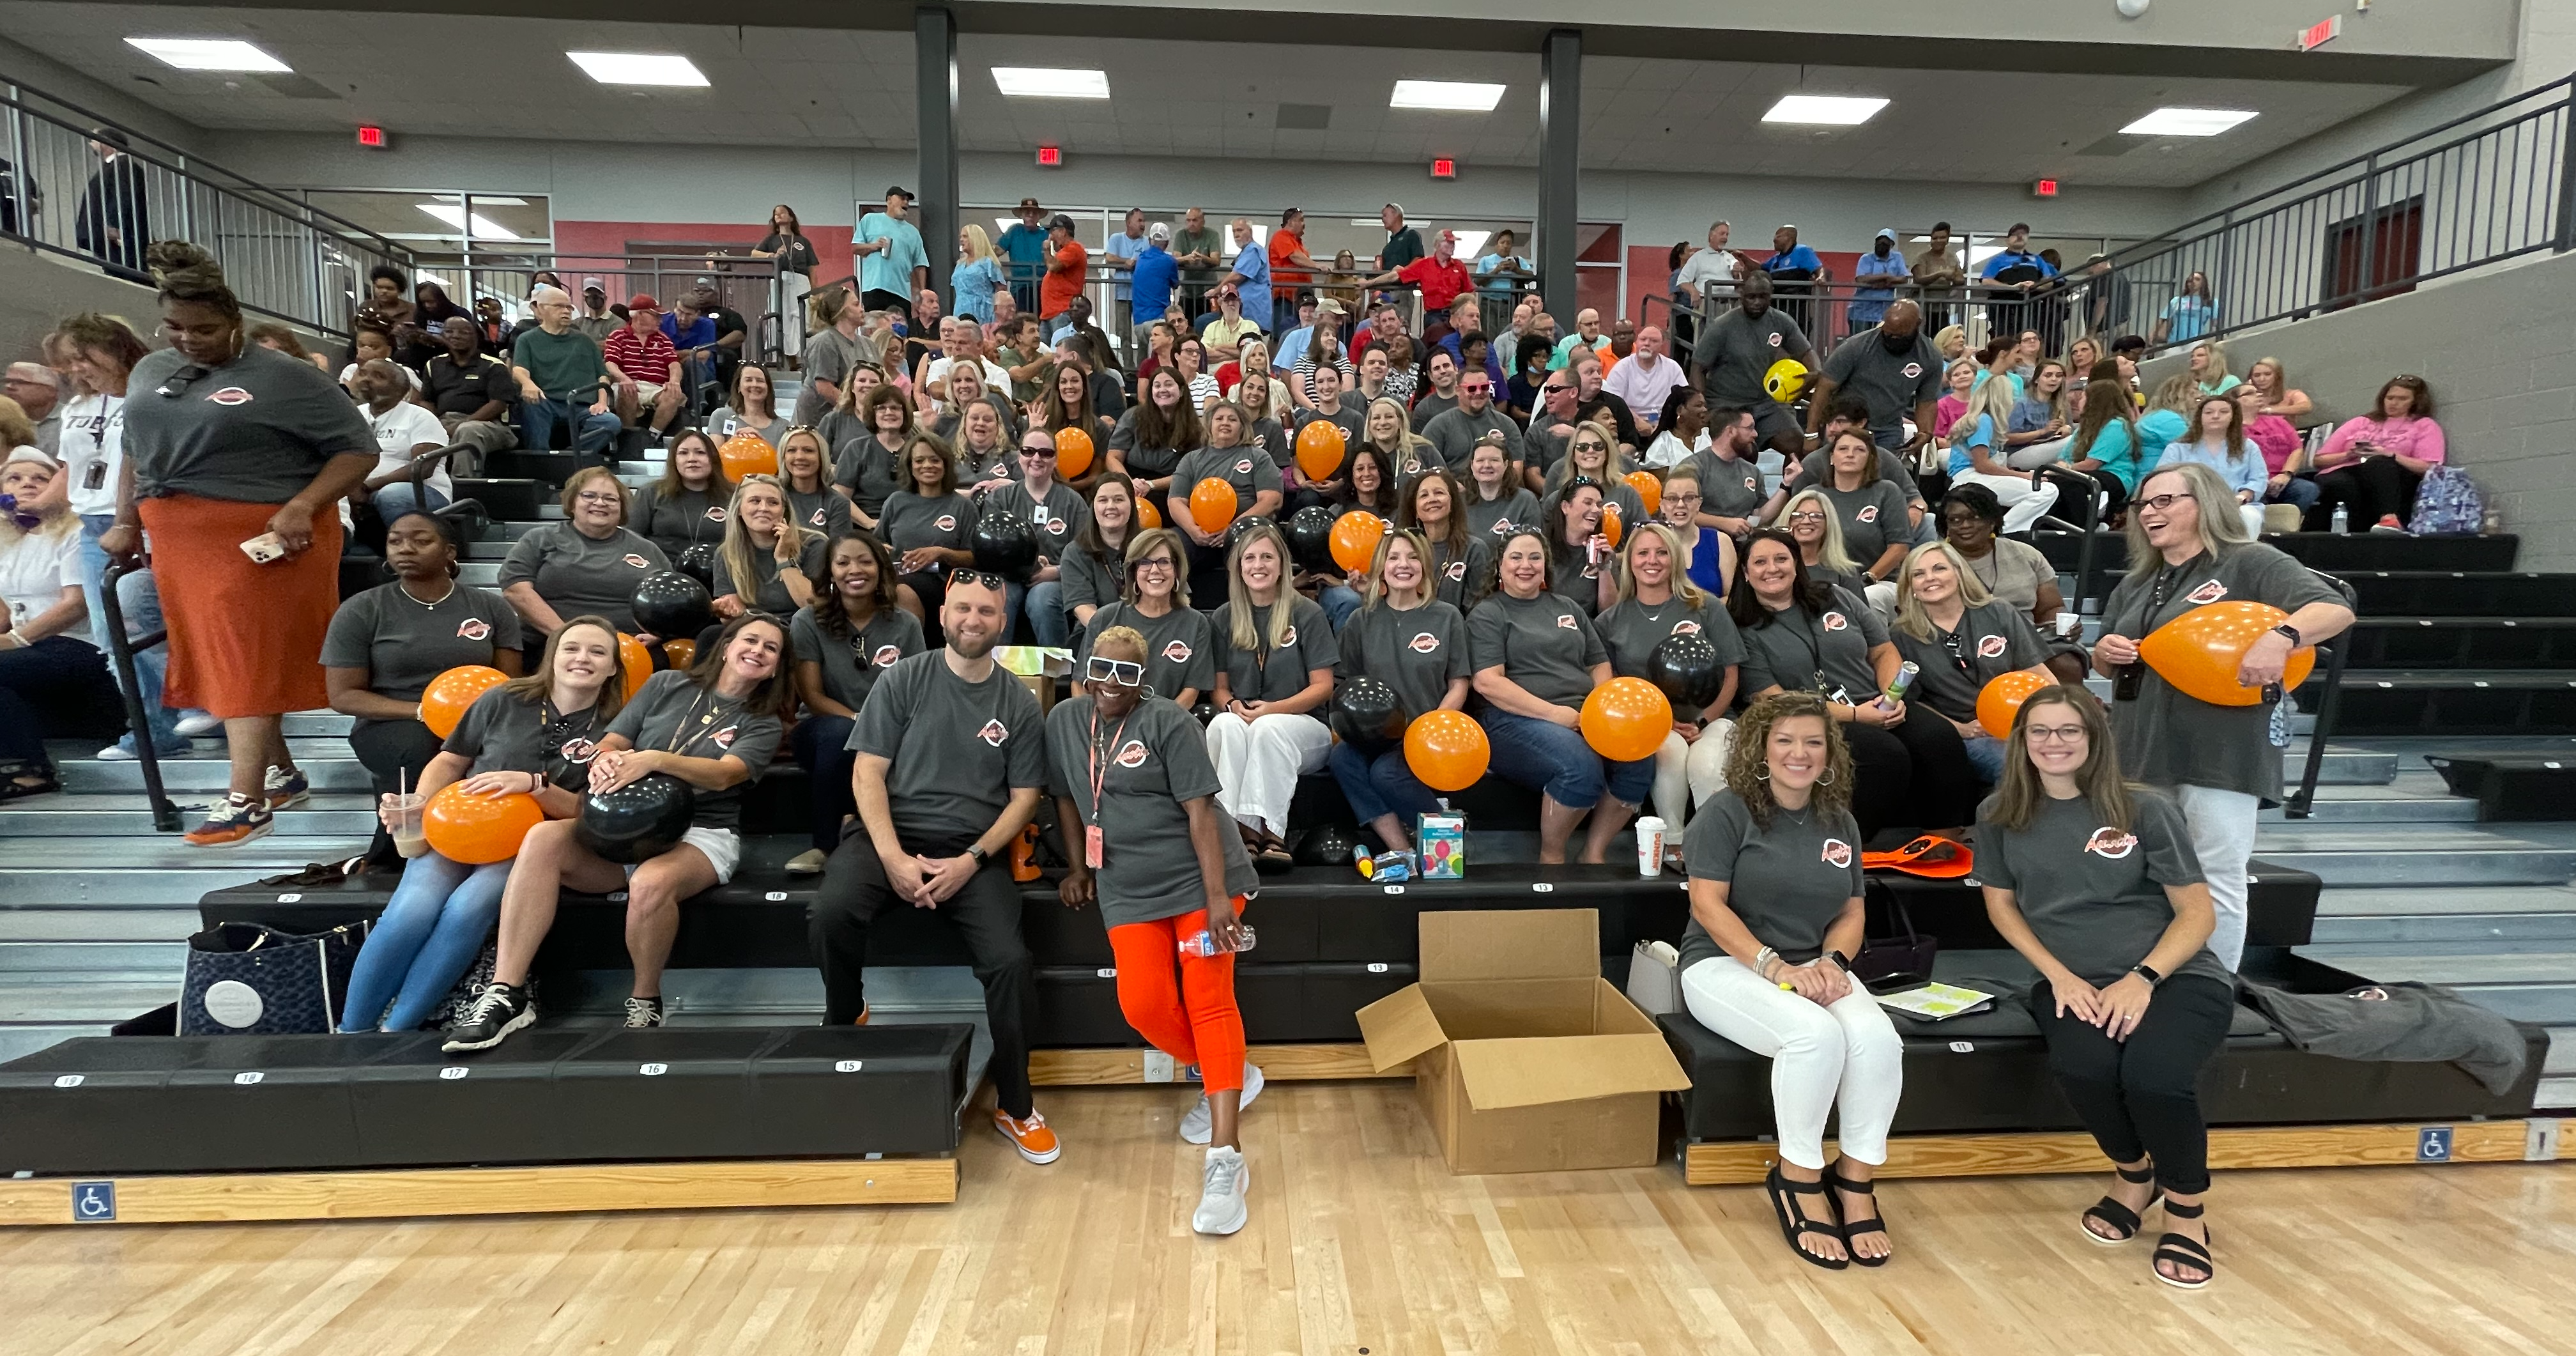 Staff take group picture on bleachers holding orange balloons